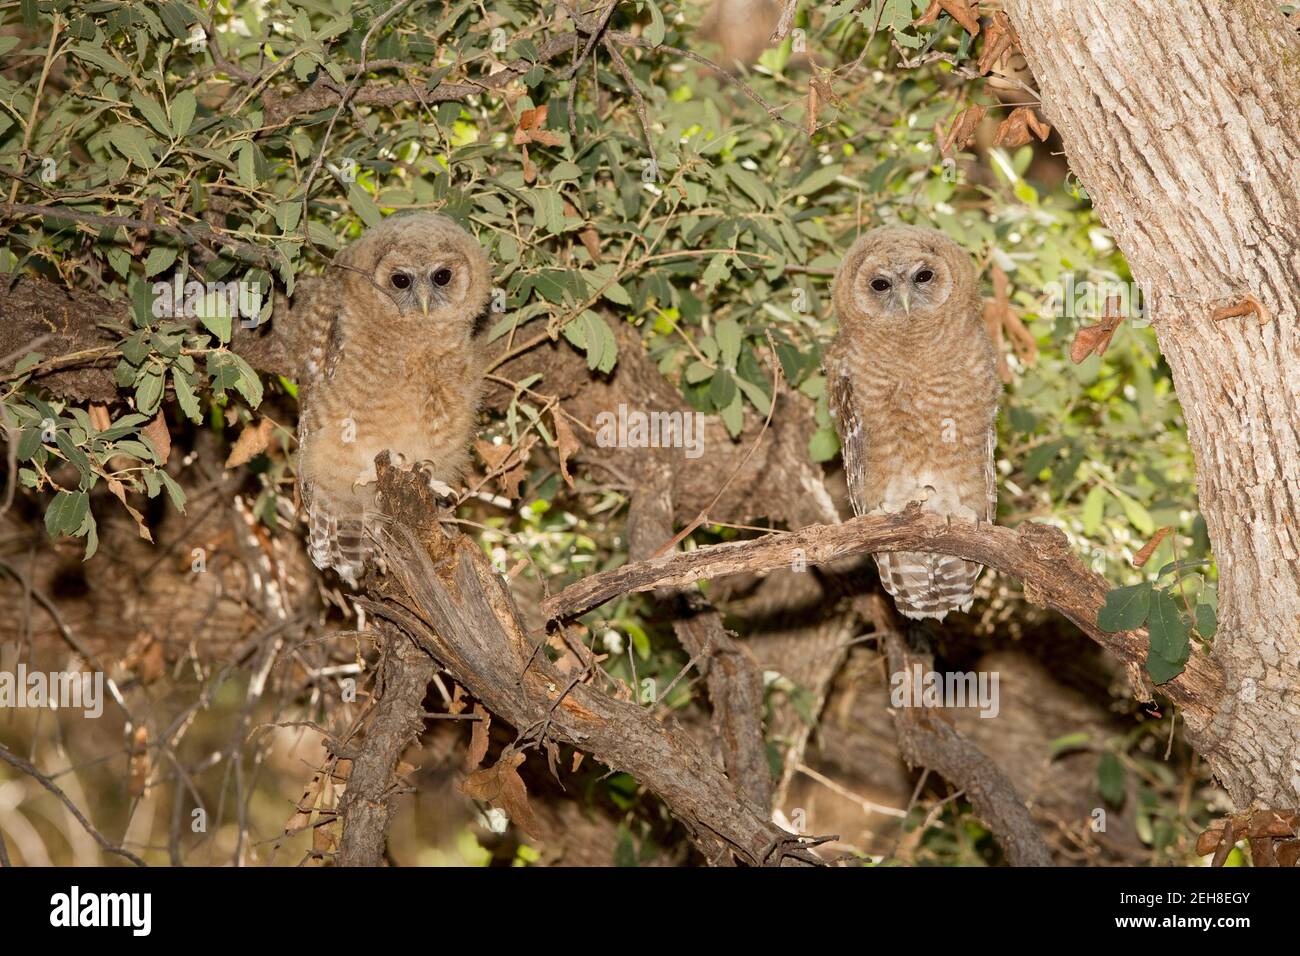 Mexican Spotted Owl fledglings, Strix occidentalis. Stock Photo